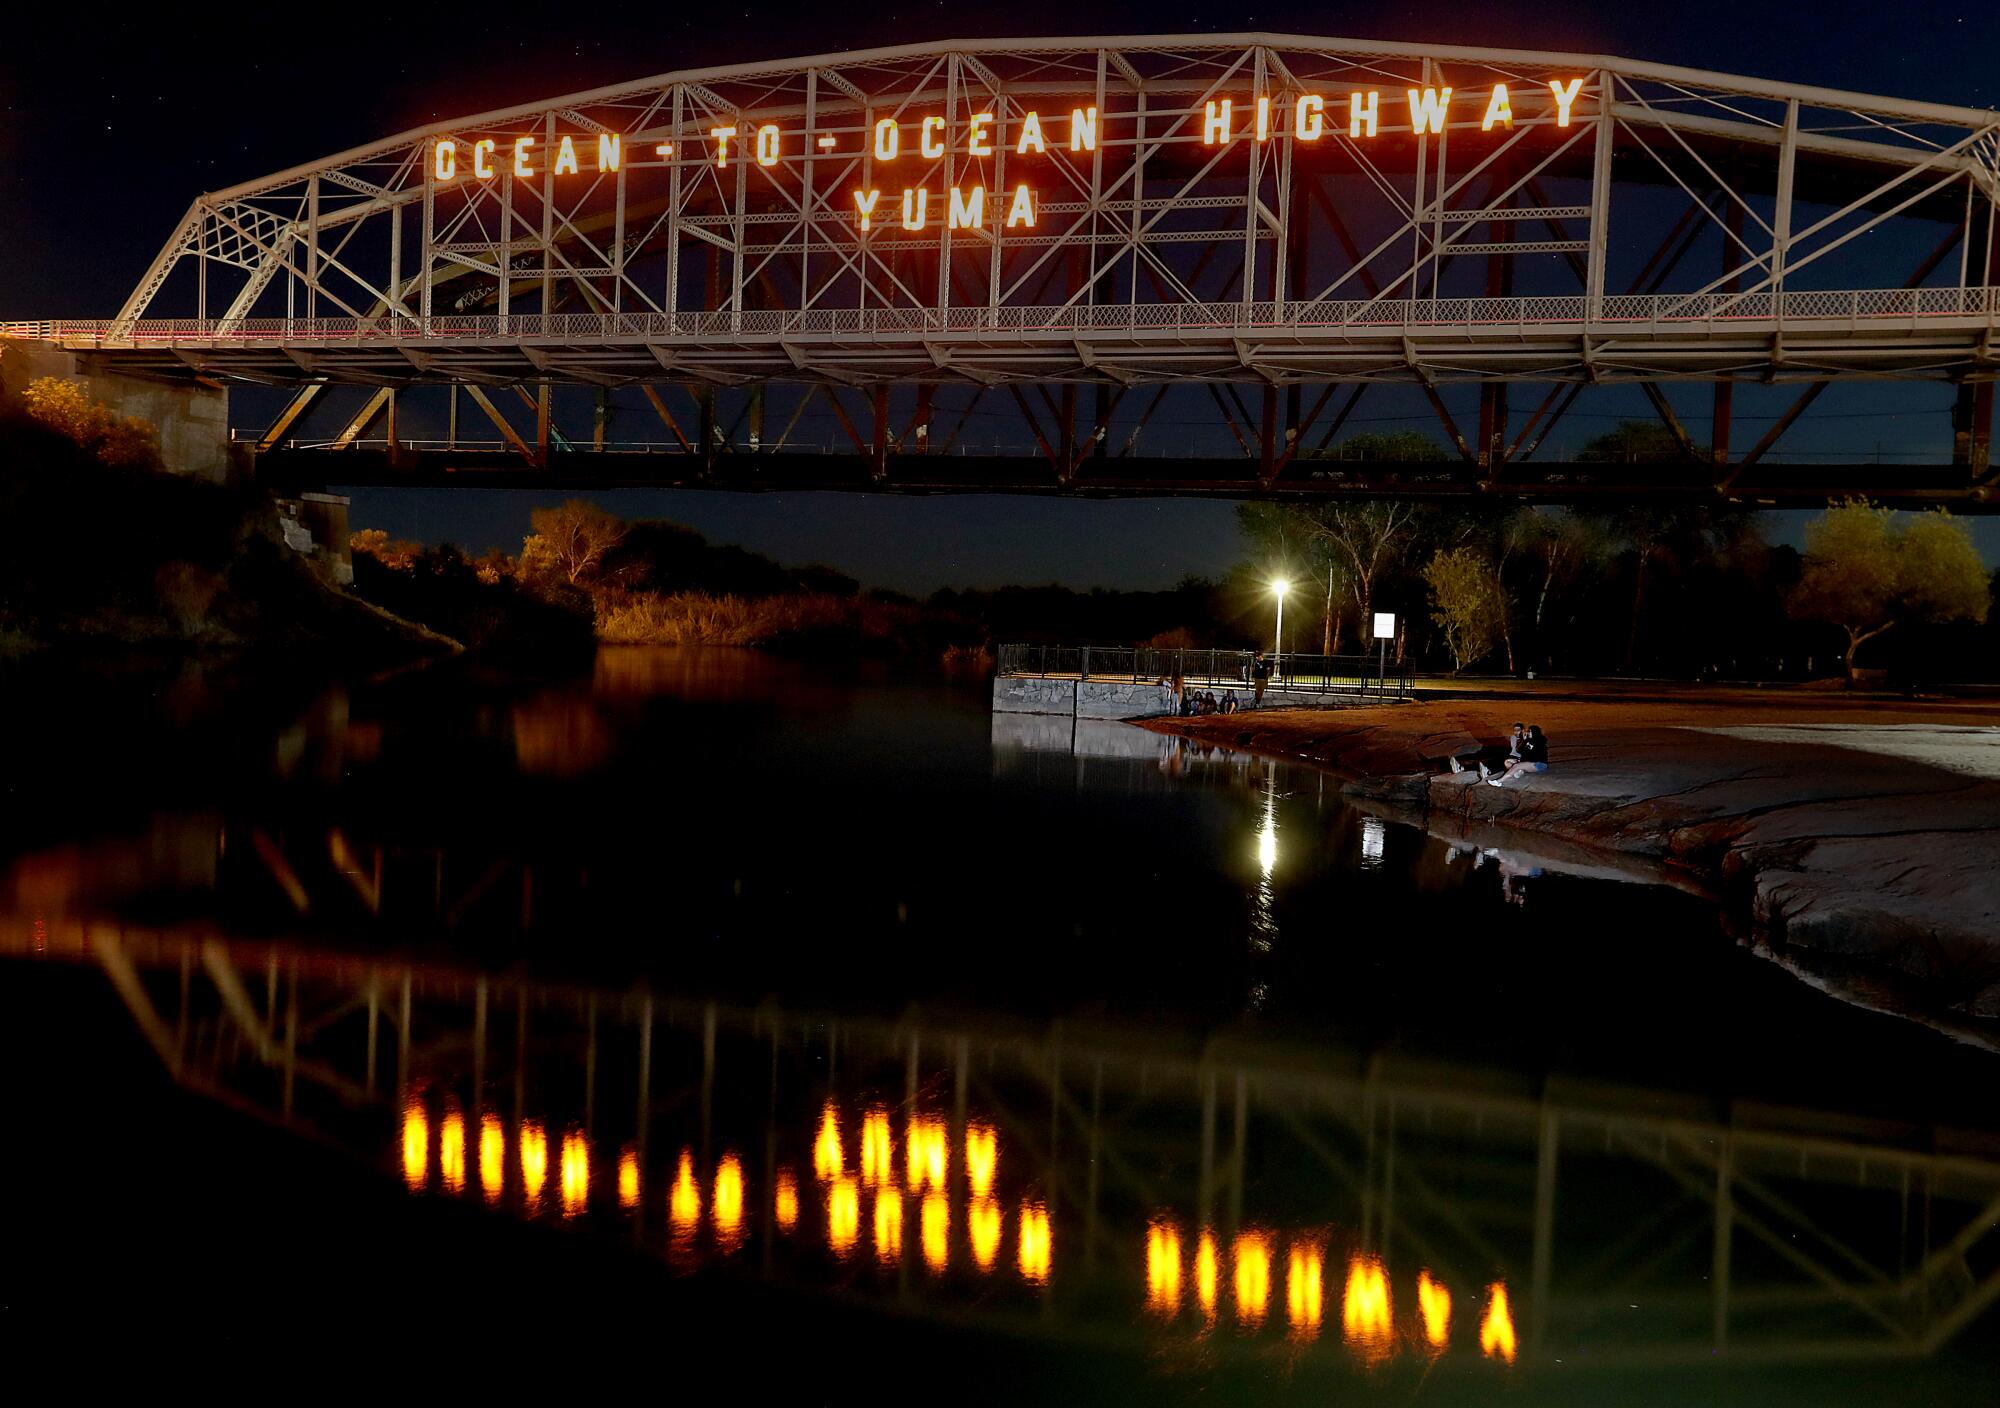 Visitors to Gateway Park in Yuma sit under the Ocean-to-Ocean Bridge, which spans the Colorado River